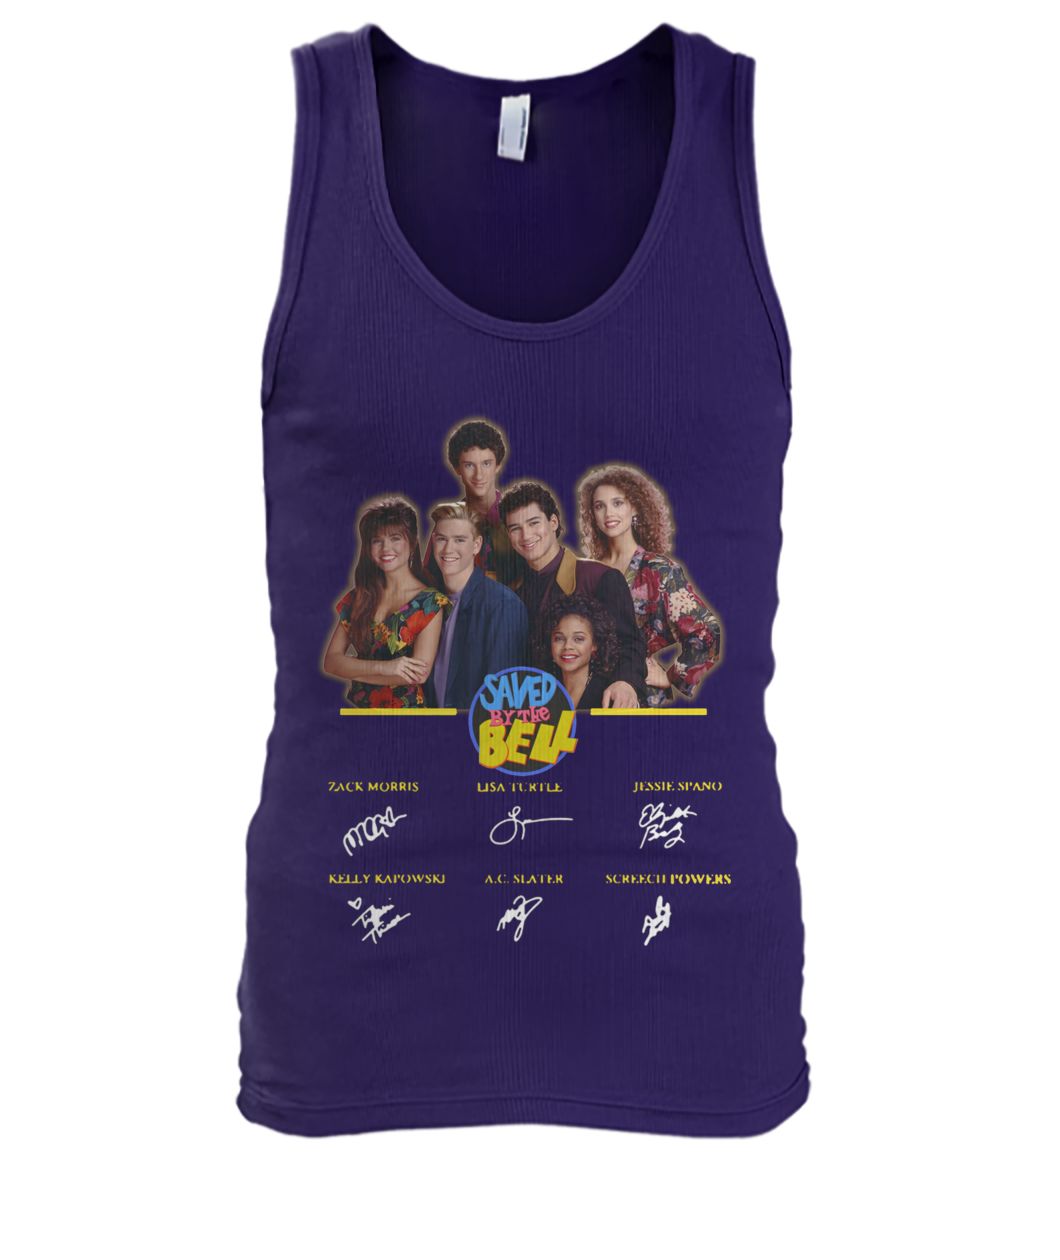 Saved by the bell characters signatures men's tank top